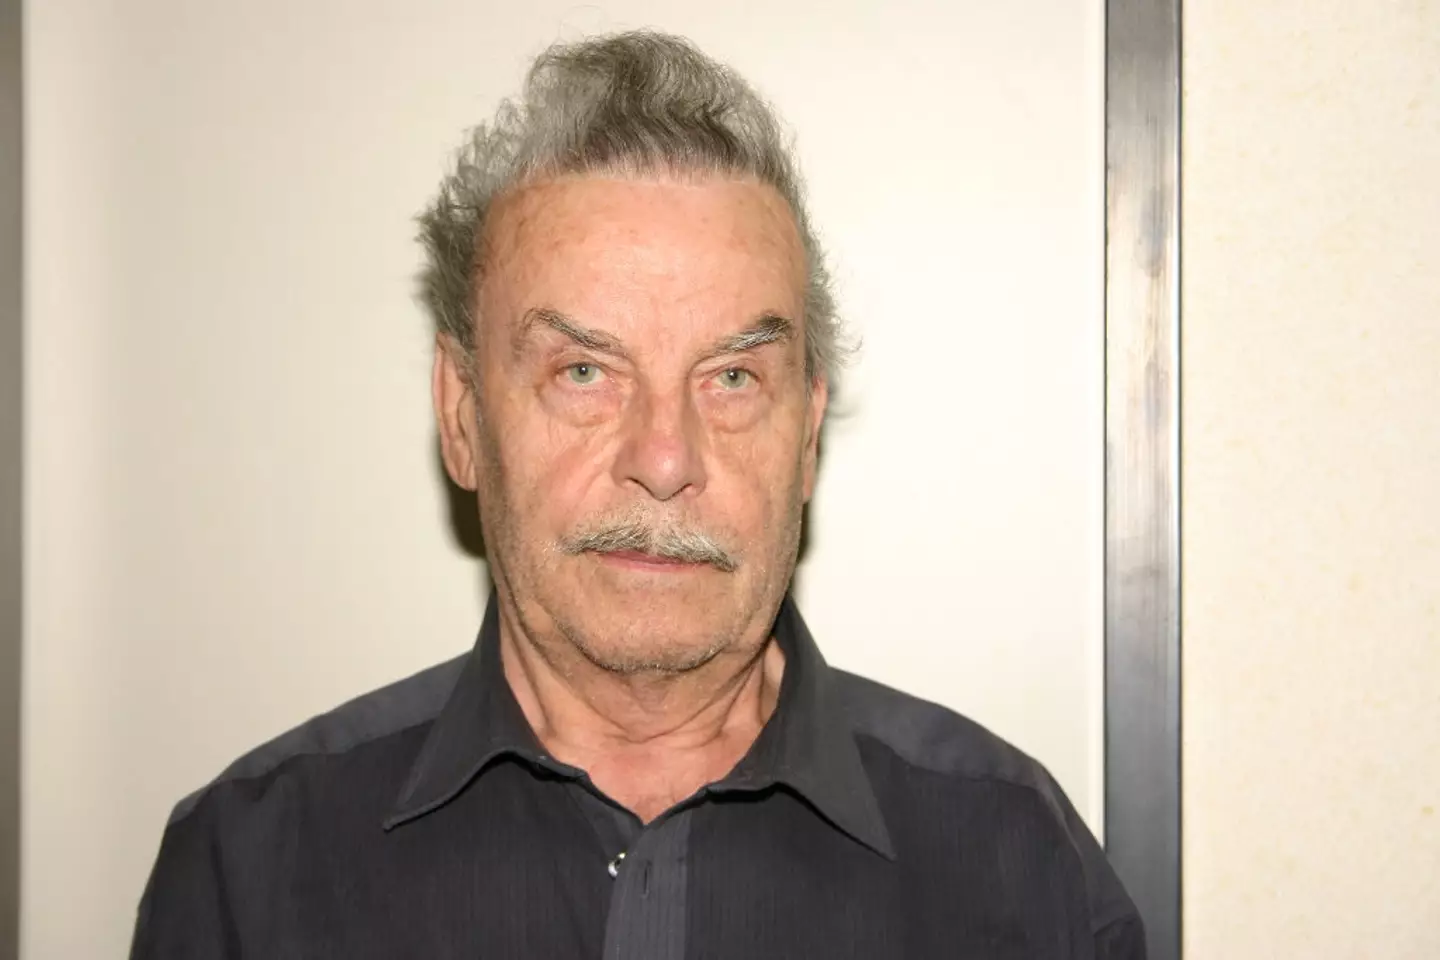 Josef Fritzl is currently serving life in prison for the imprisonment, rape and abuse of his daughter, Elisabeth.